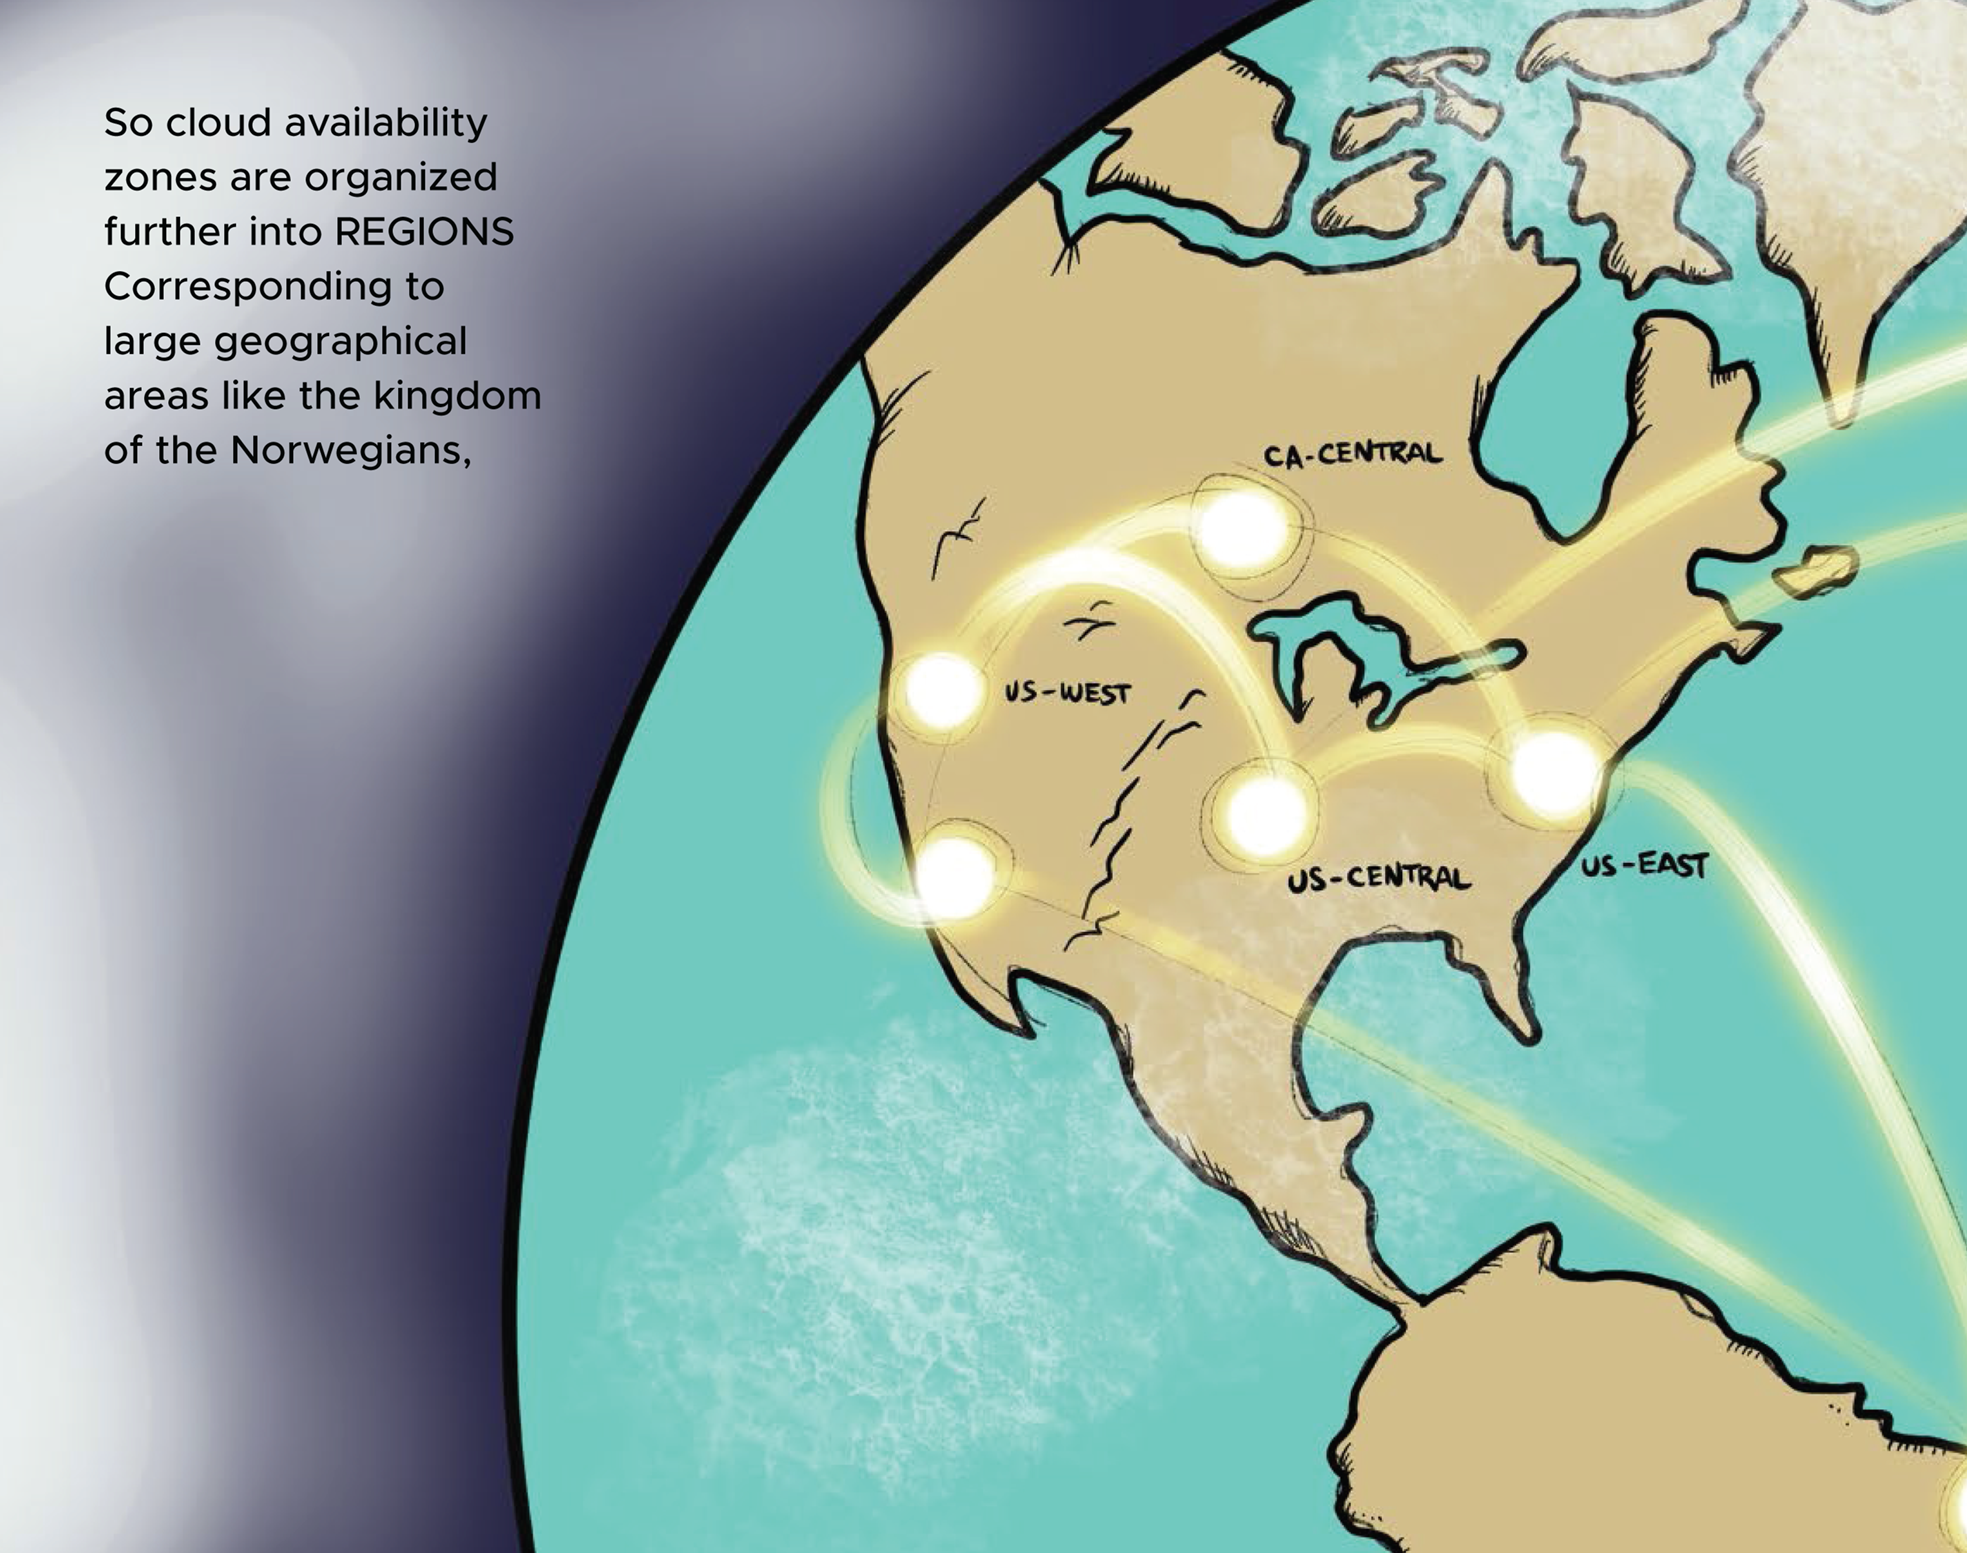 Cartoon illustration of the earth depicting the locations of cloud availability zones.